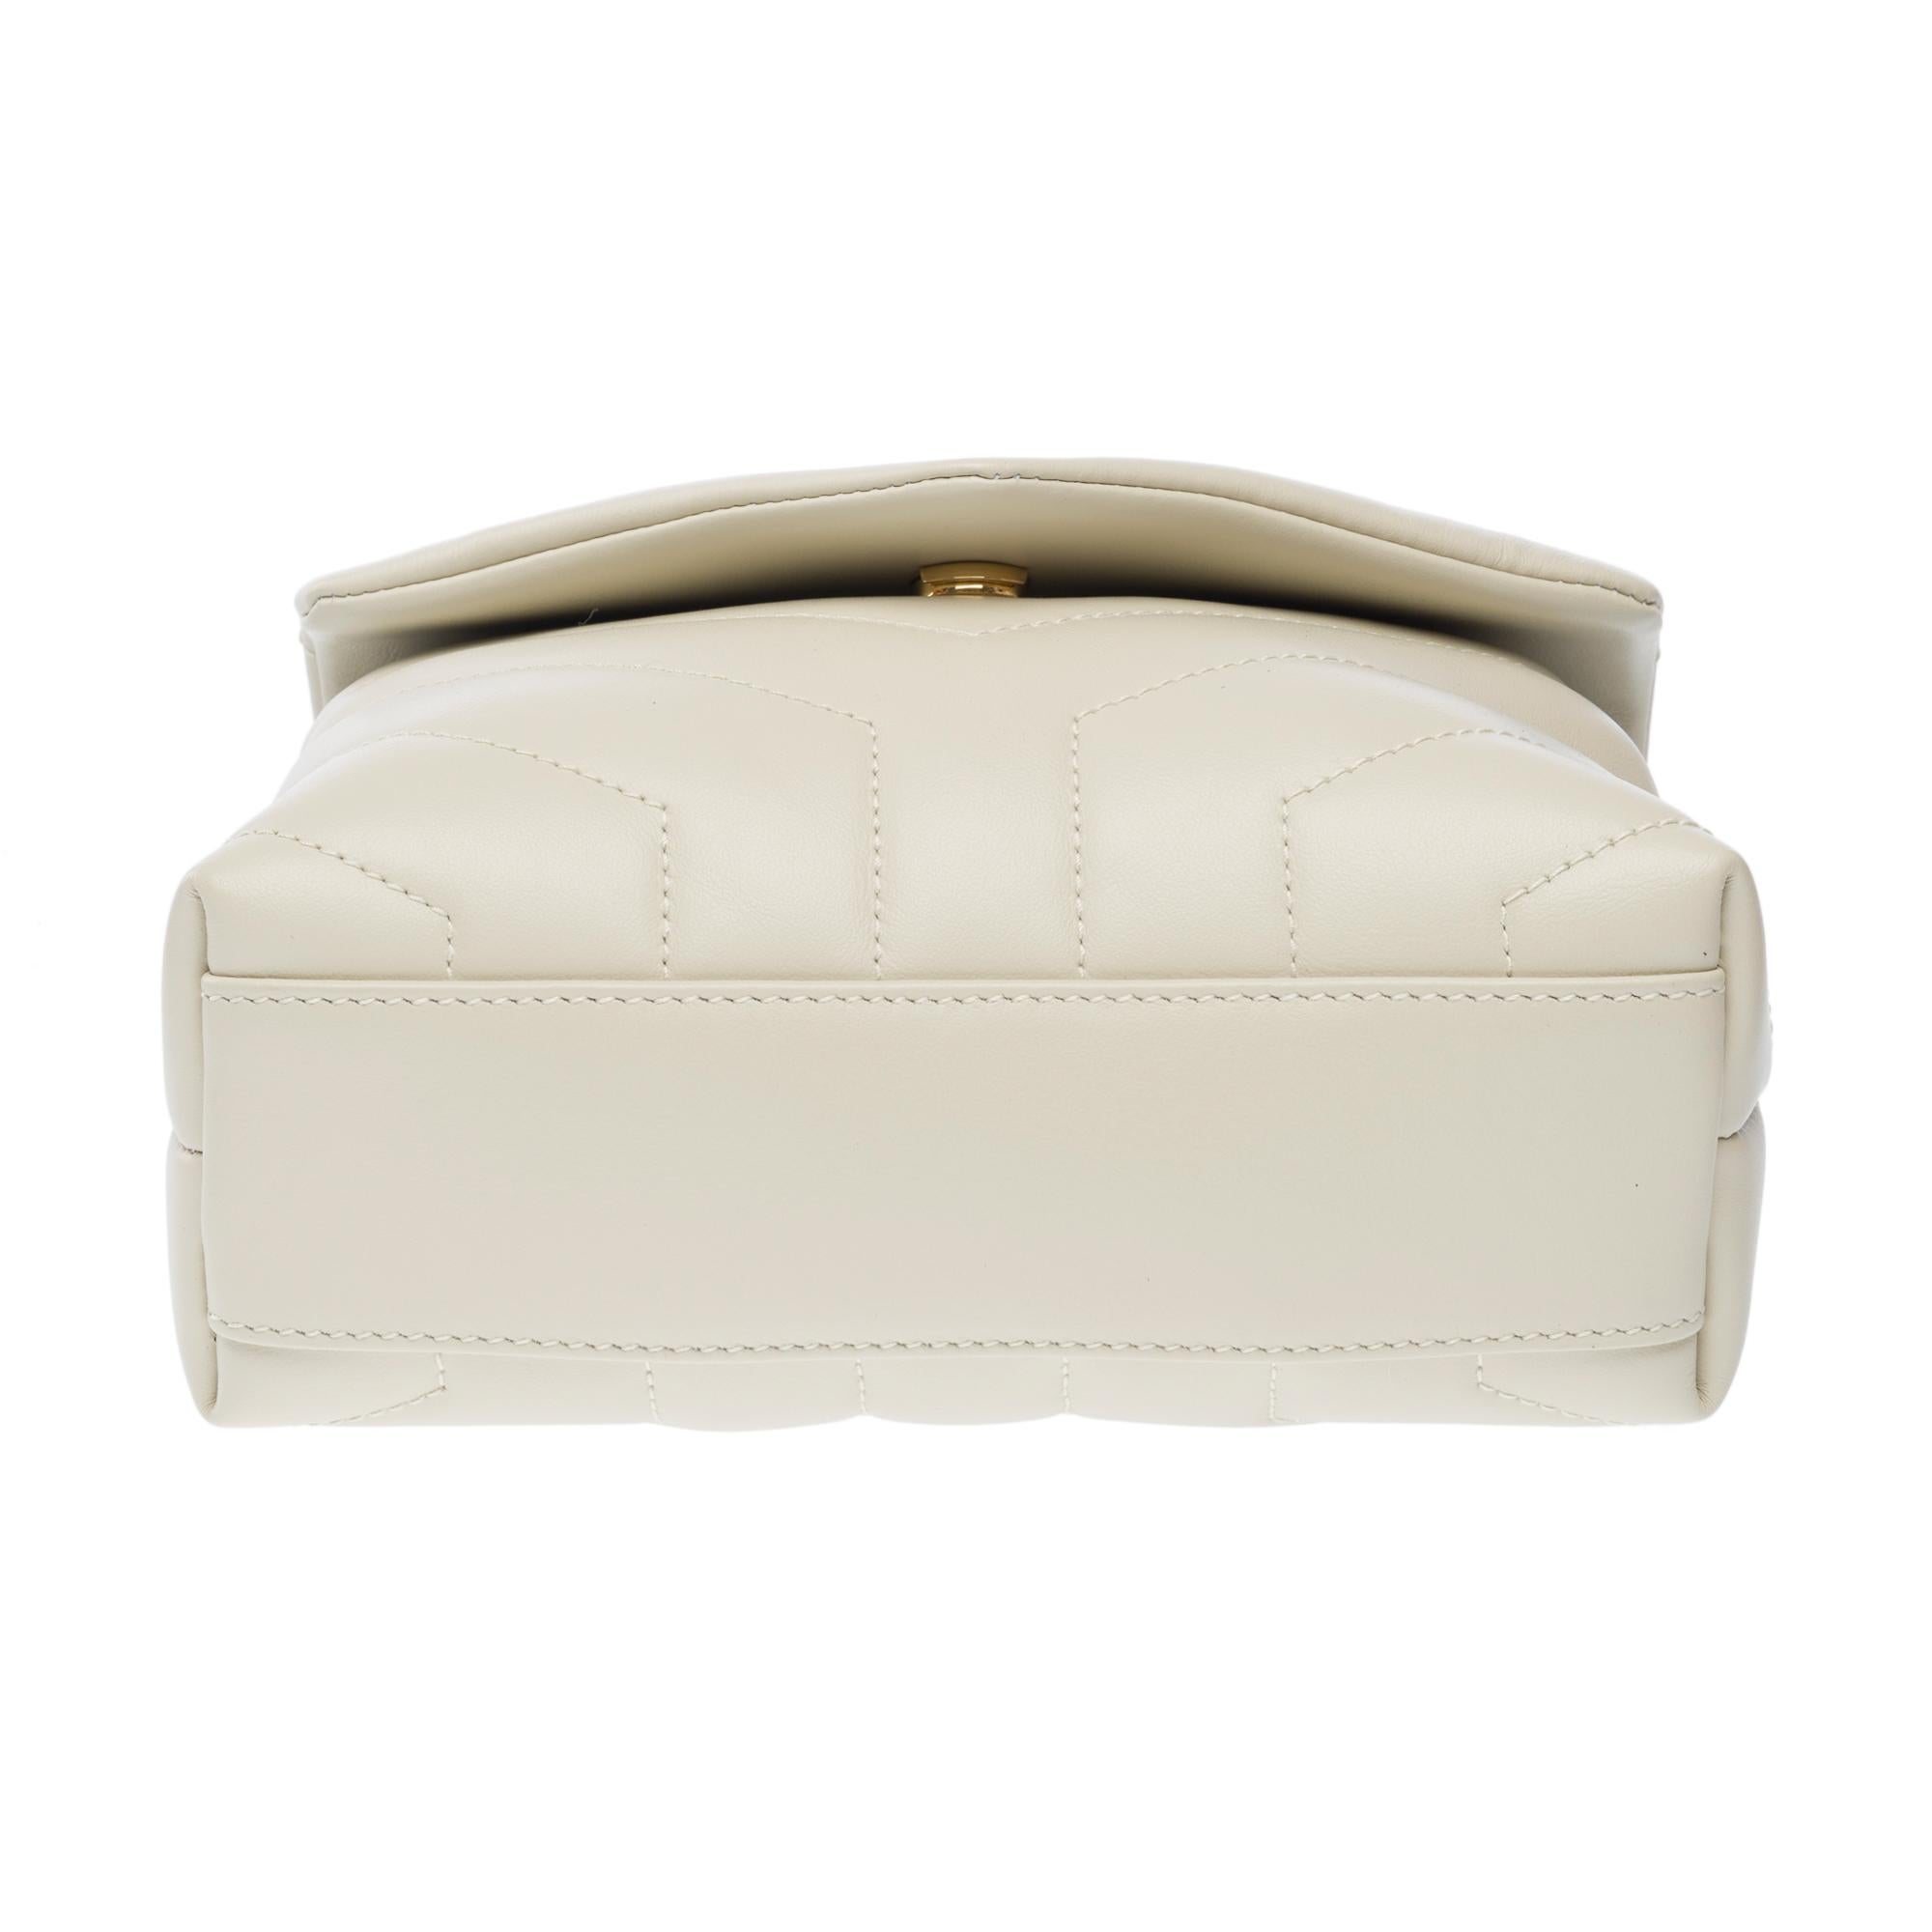 YSL Loulou Toy shoulder bag in beige quilted calf leather, GHW For Sale 6